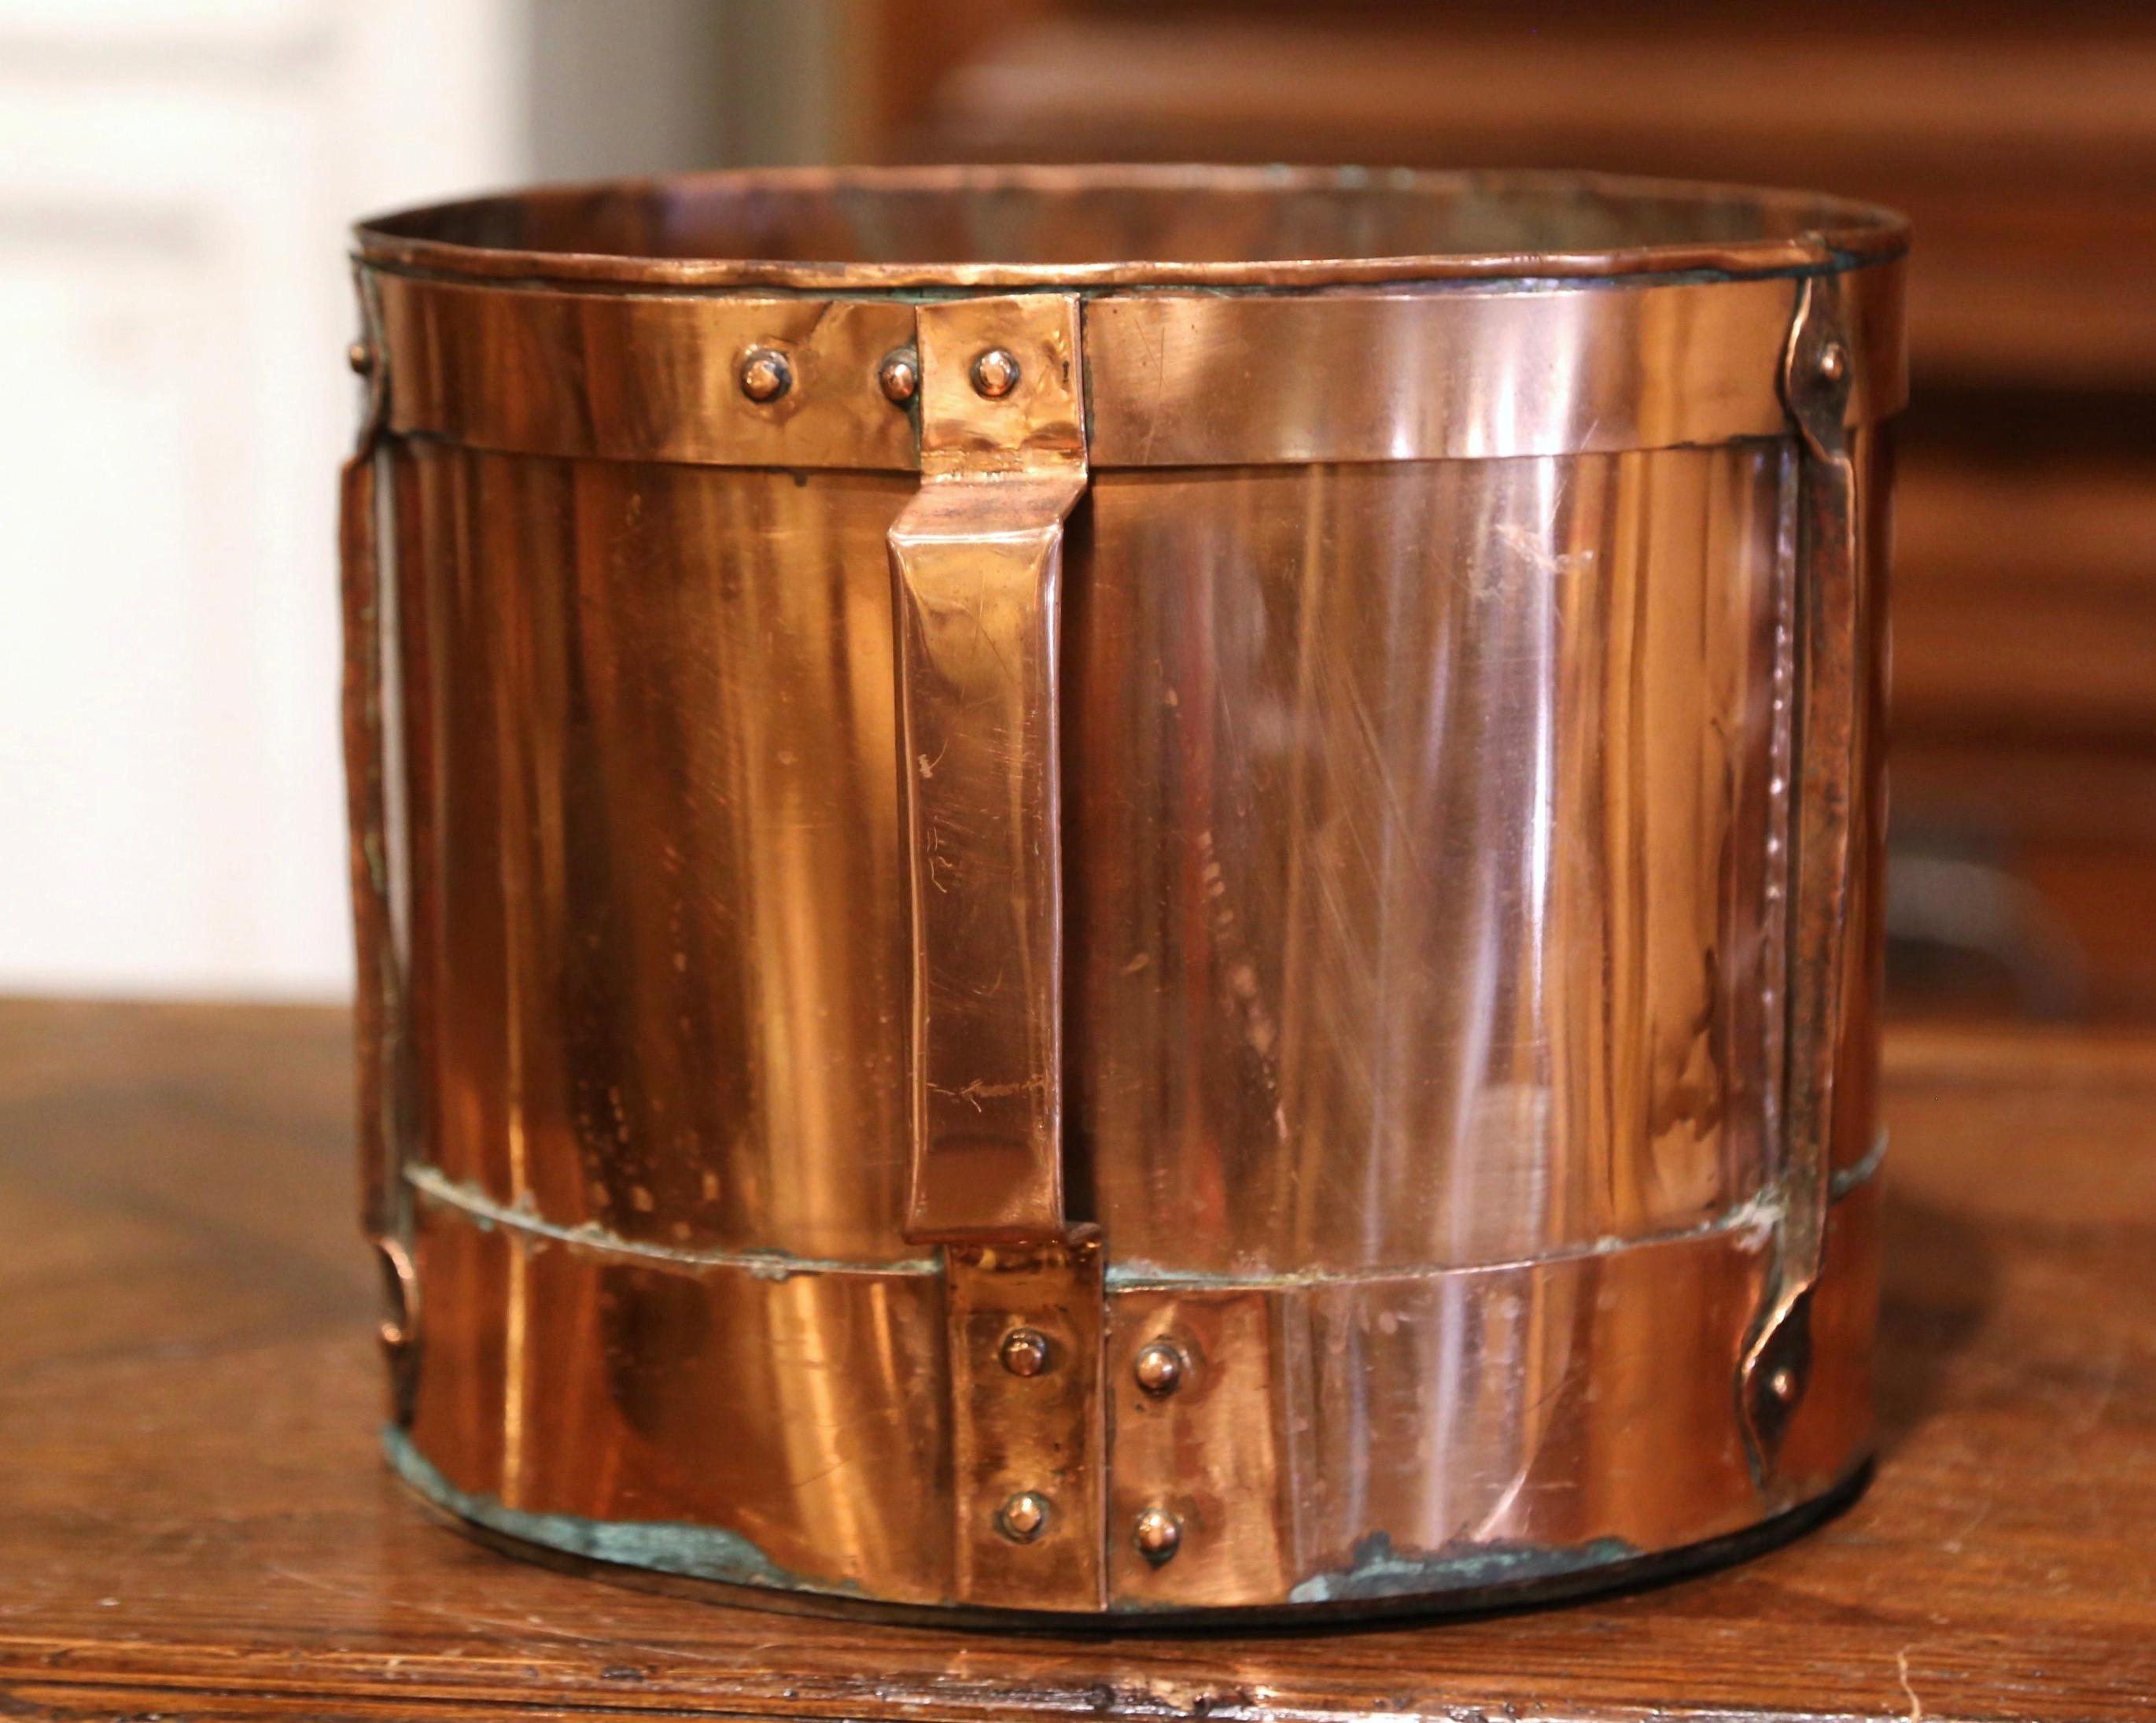 This antique grain measuring recipient was crafted in France, circa 1870. The bucket features copper strapping motifs, forged nails on the outside and two side handles. The measuring tool is in excellent condition, and has a rich copper polished